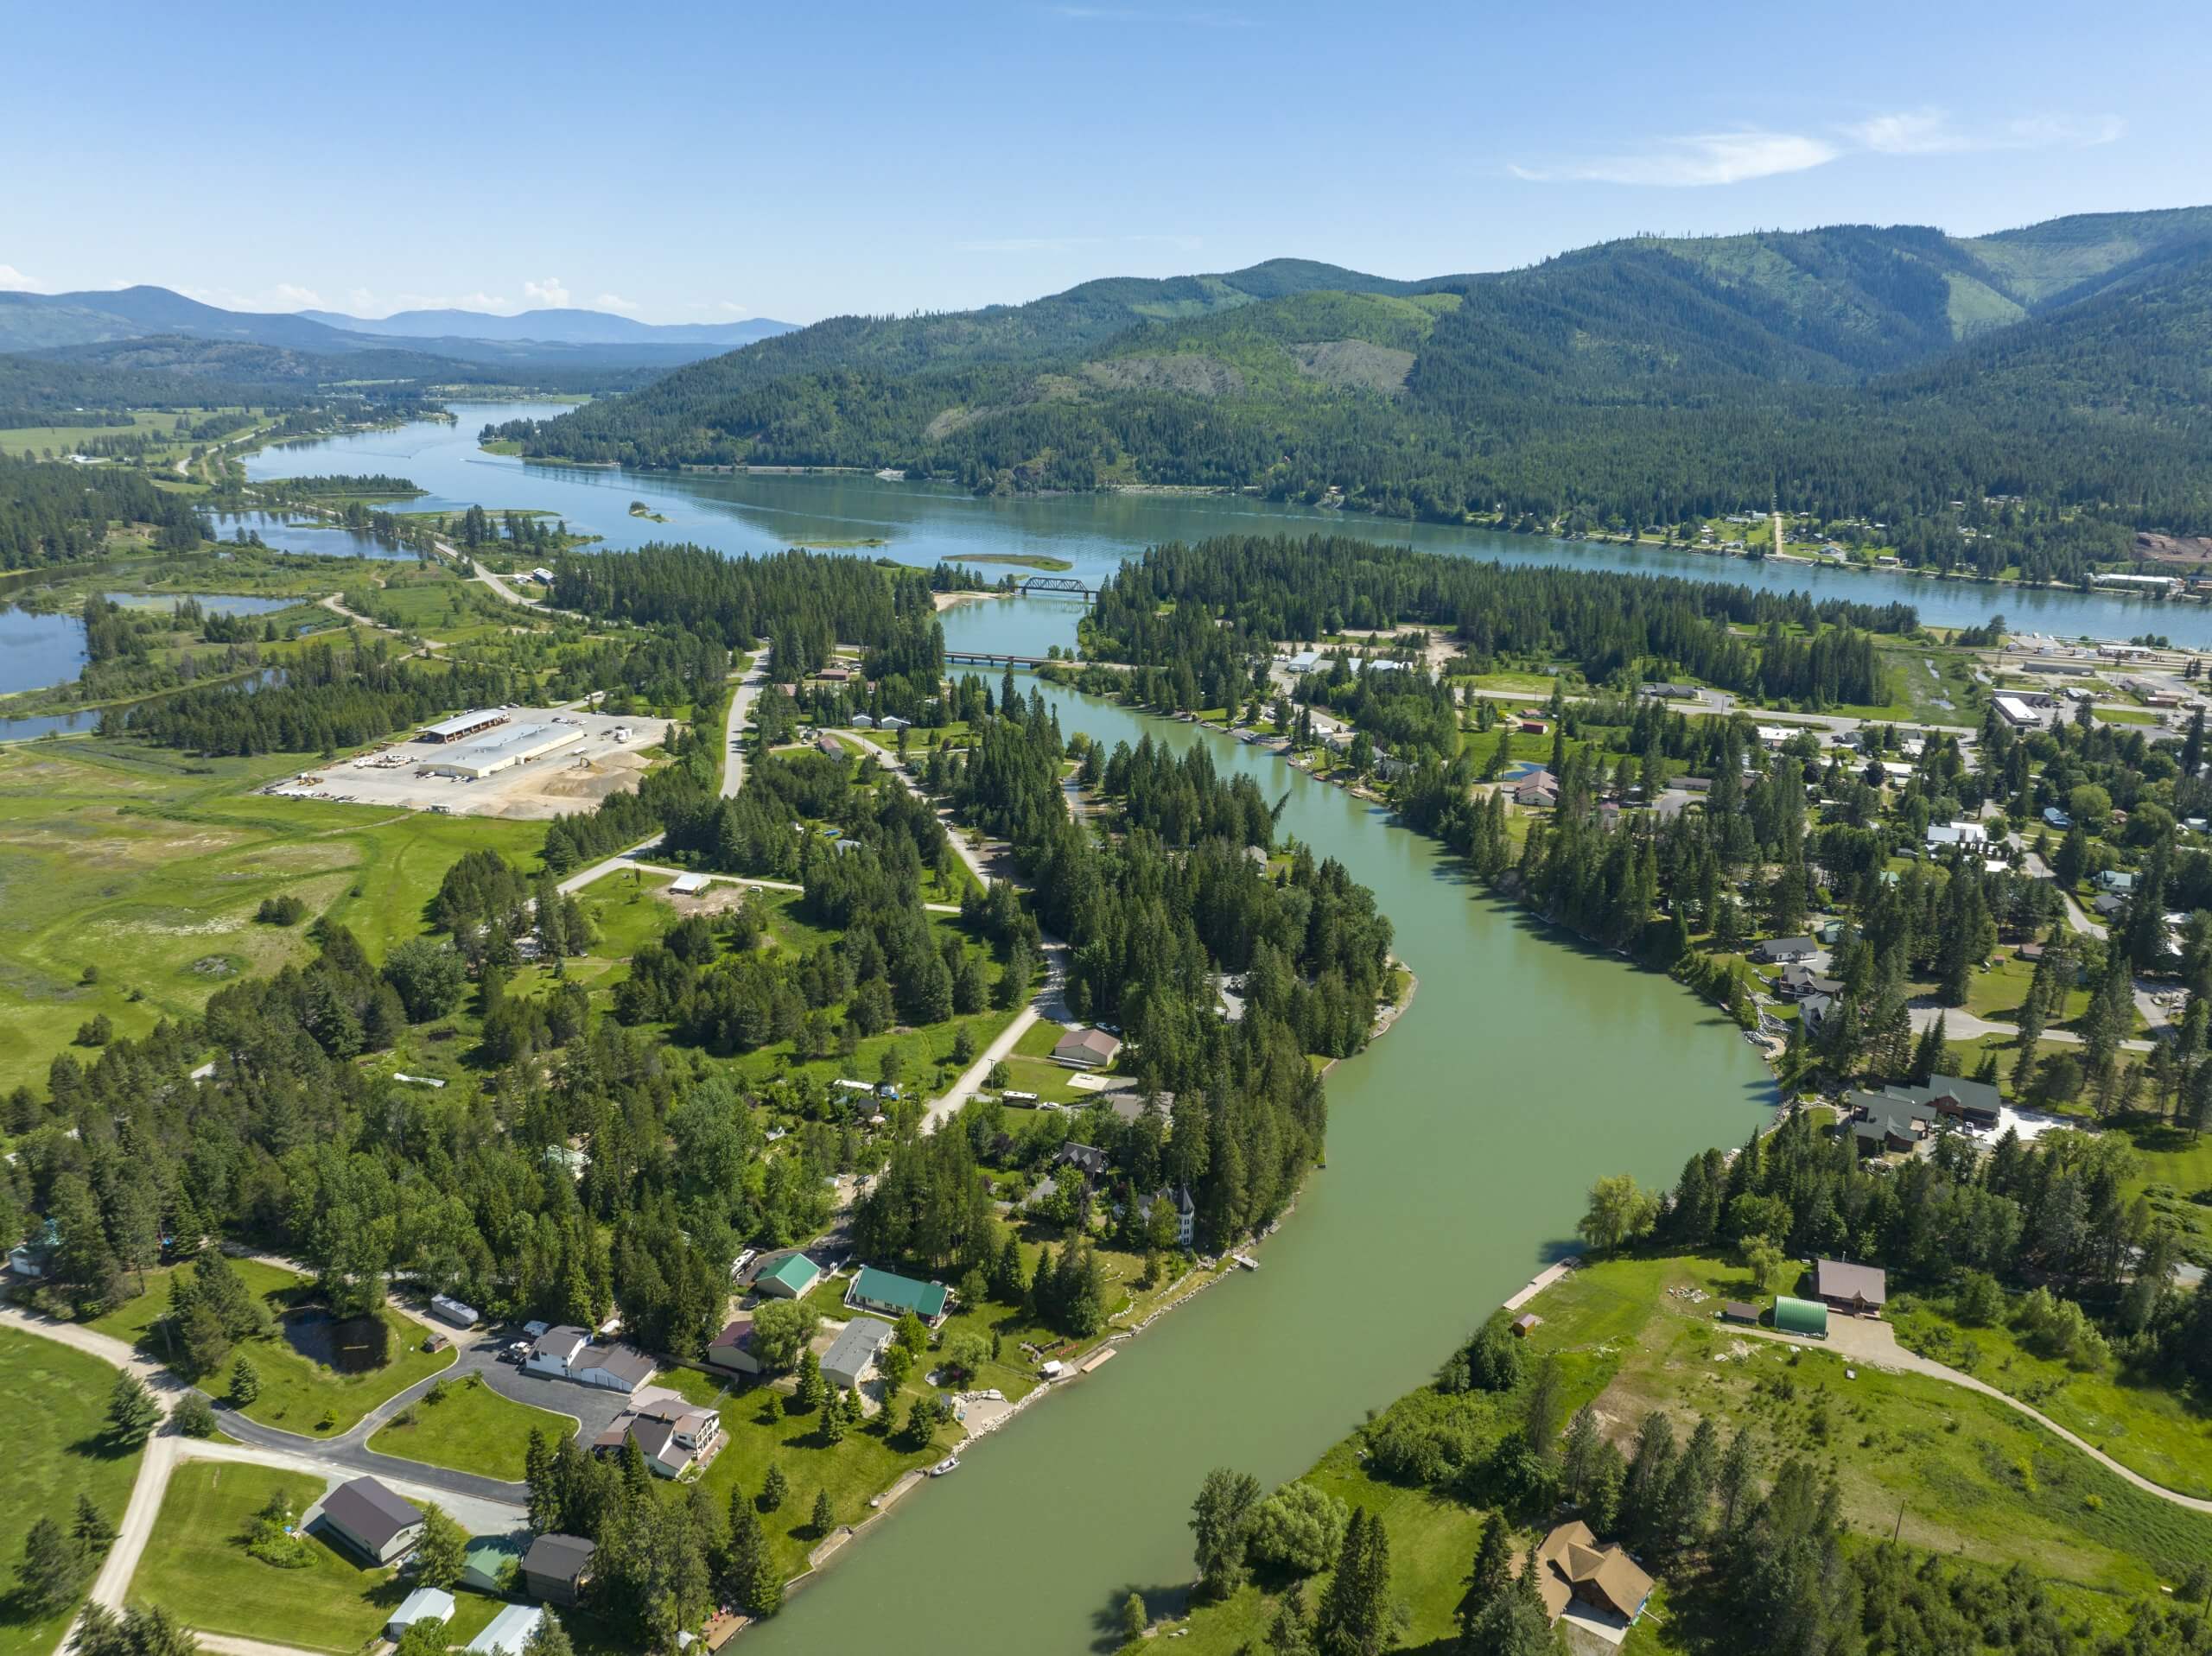 Aerial view of a river running through the town of Priest River, with tree covered mountains in the distance.